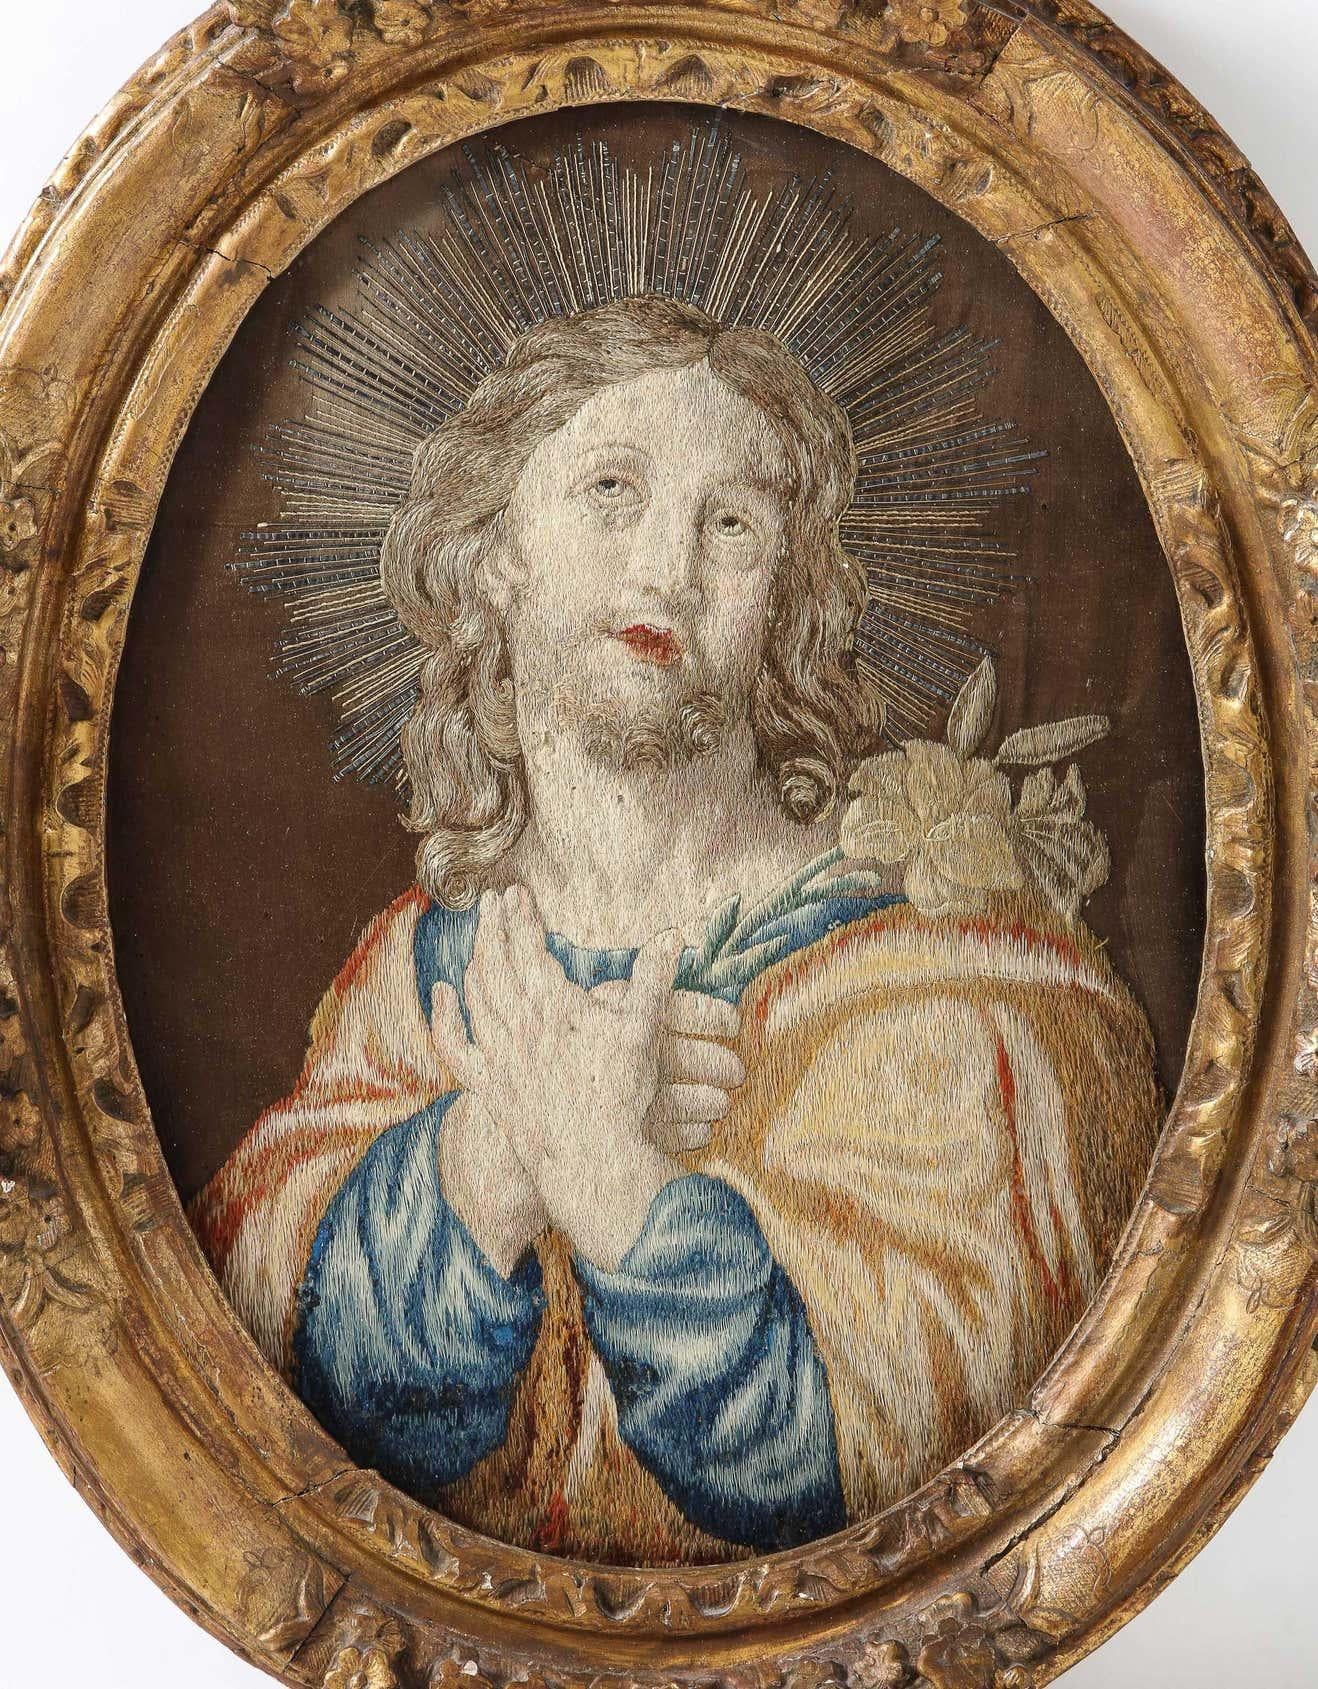 A rare 18th century Italian embroidered panel of Holy Jesus Christ, in the original giltwood frame.  

